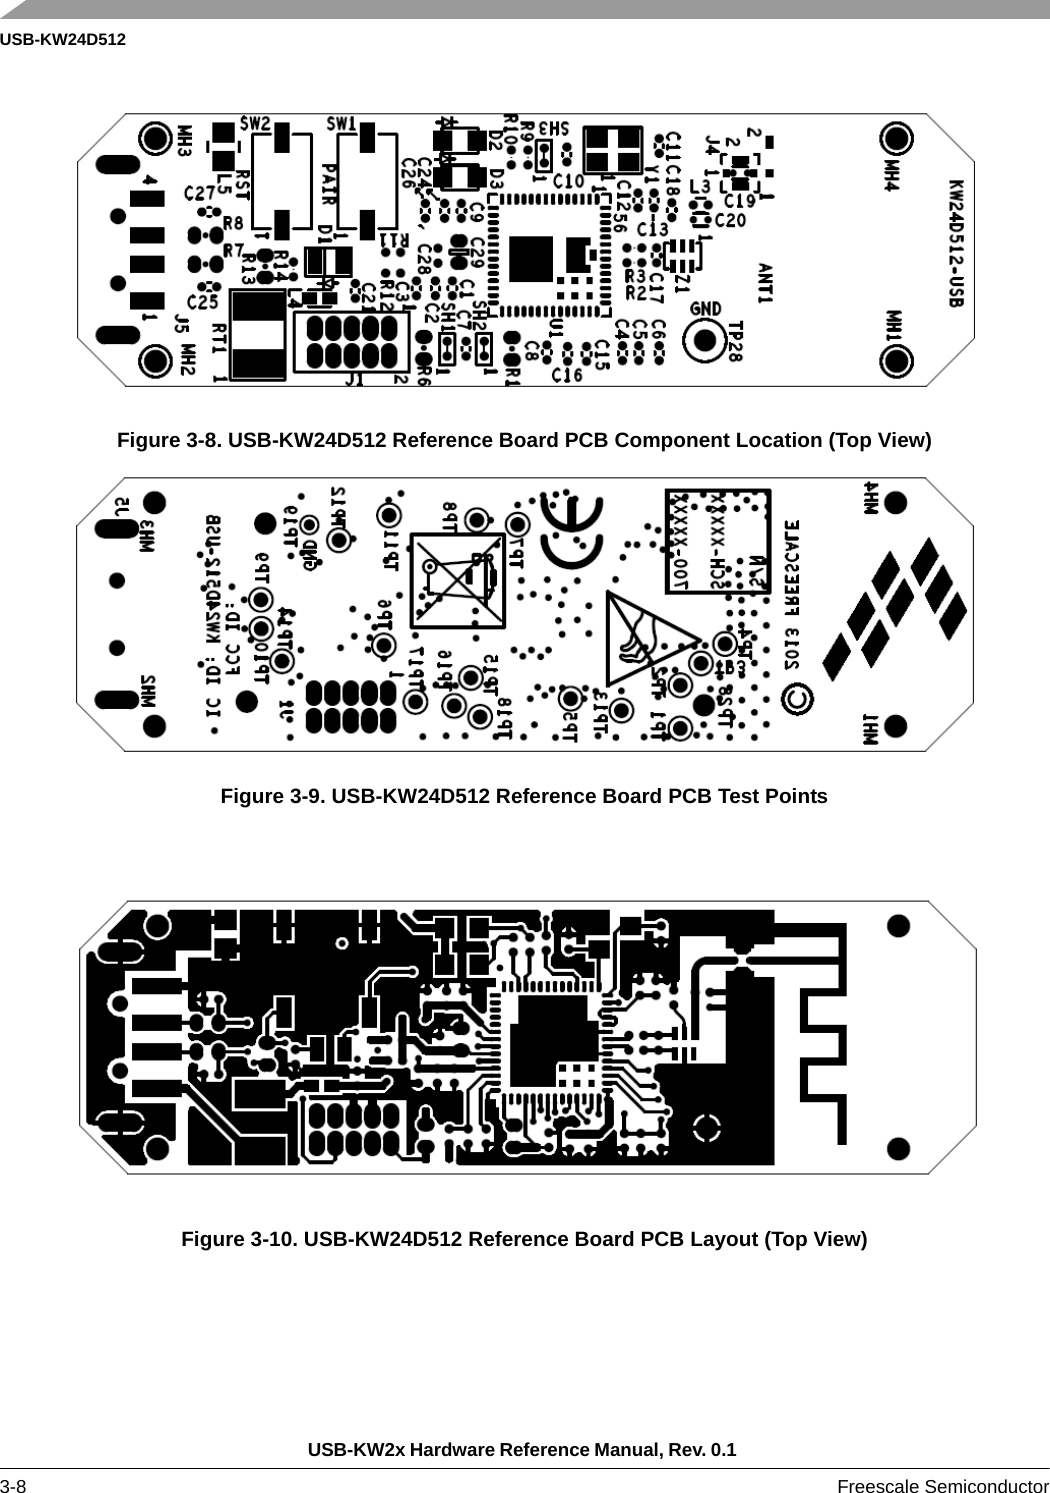 USB-KW24D512USB-KW2x Hardware Reference Manual, Rev. 0.1 3-8 Freescale SemiconductorFigure 3-8. USB-KW24D512 Reference Board PCB Component Location (Top View)Figure 3-9. USB-KW24D512 Reference Board PCB Test PointsFigure 3-10. USB-KW24D512 Reference Board PCB Layout (Top View)